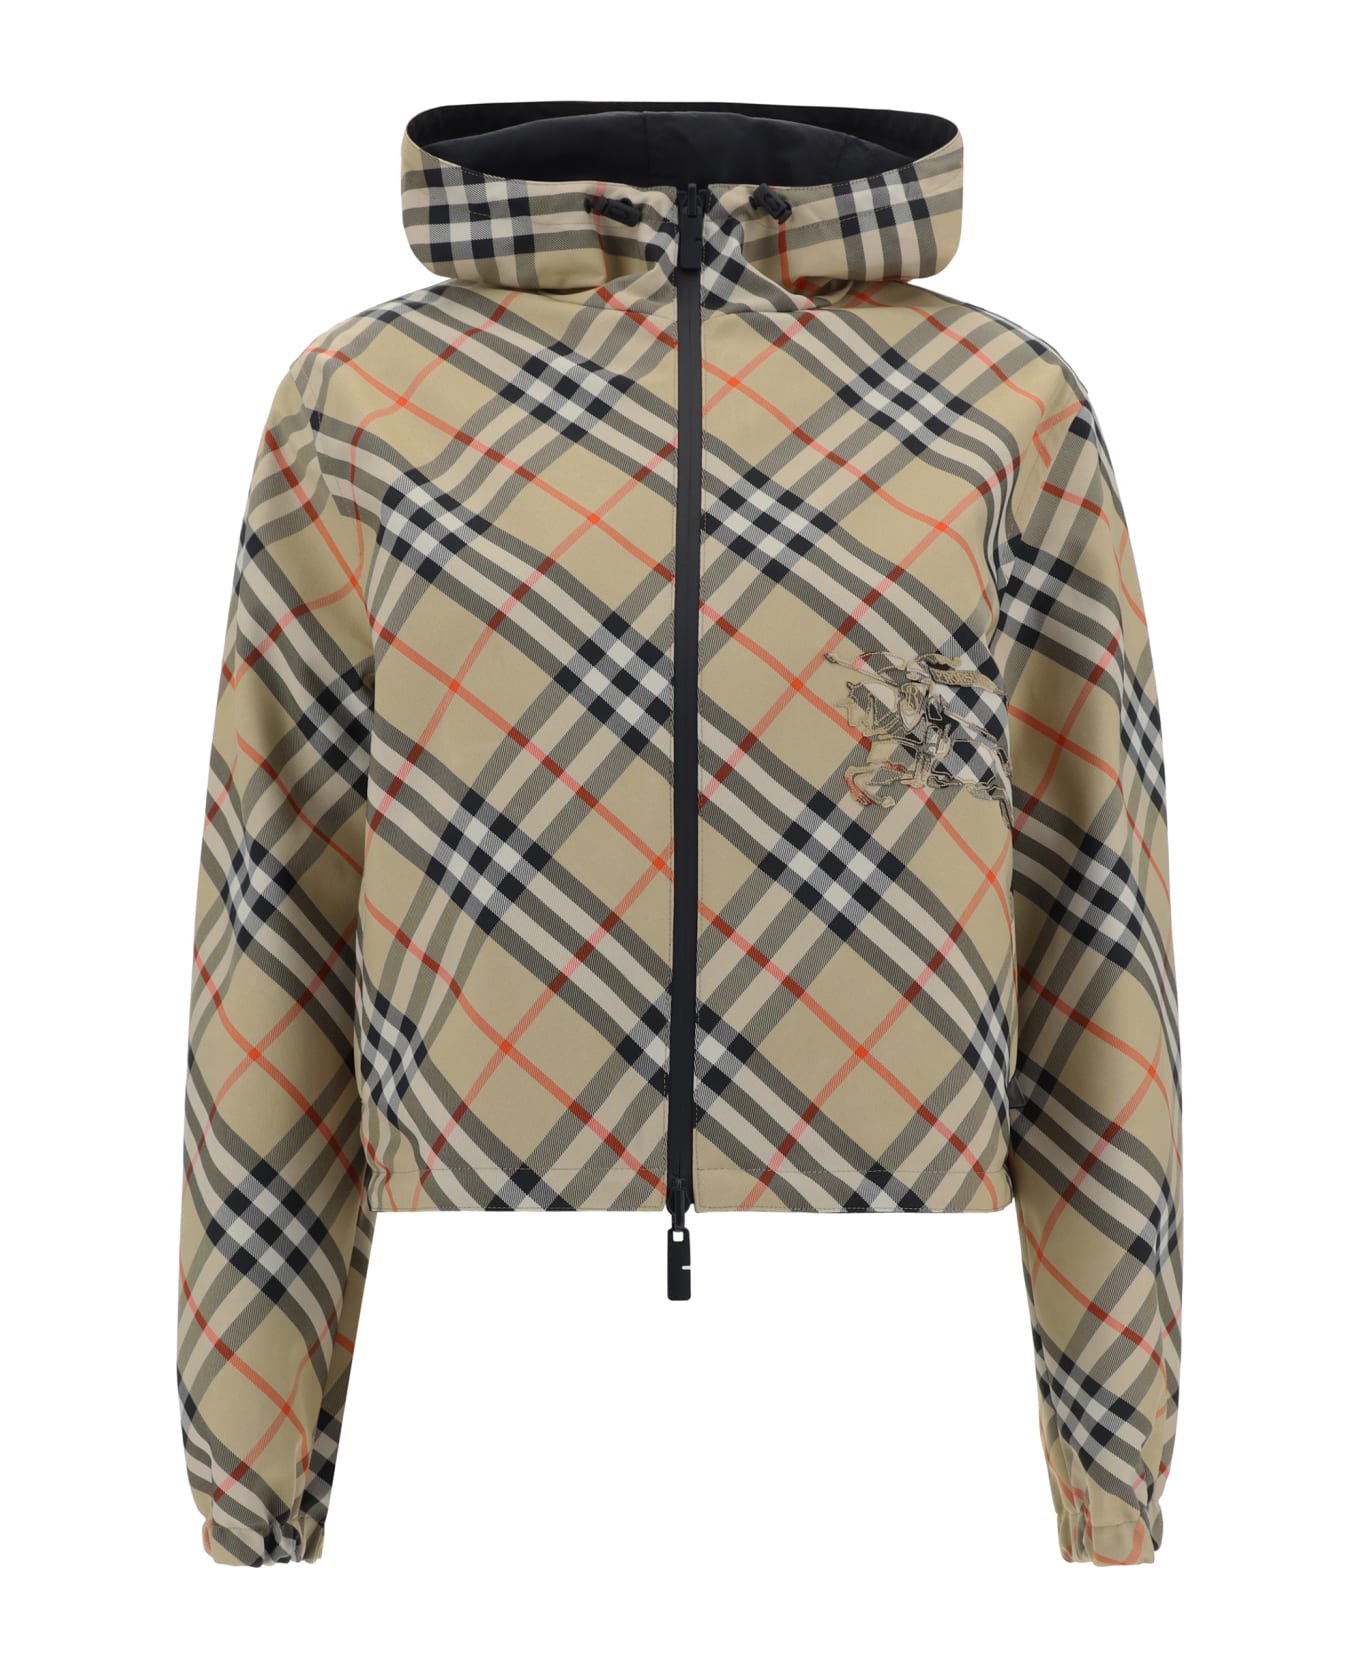 Burberry Reversible Hooded Jacket - Sand Ip Check